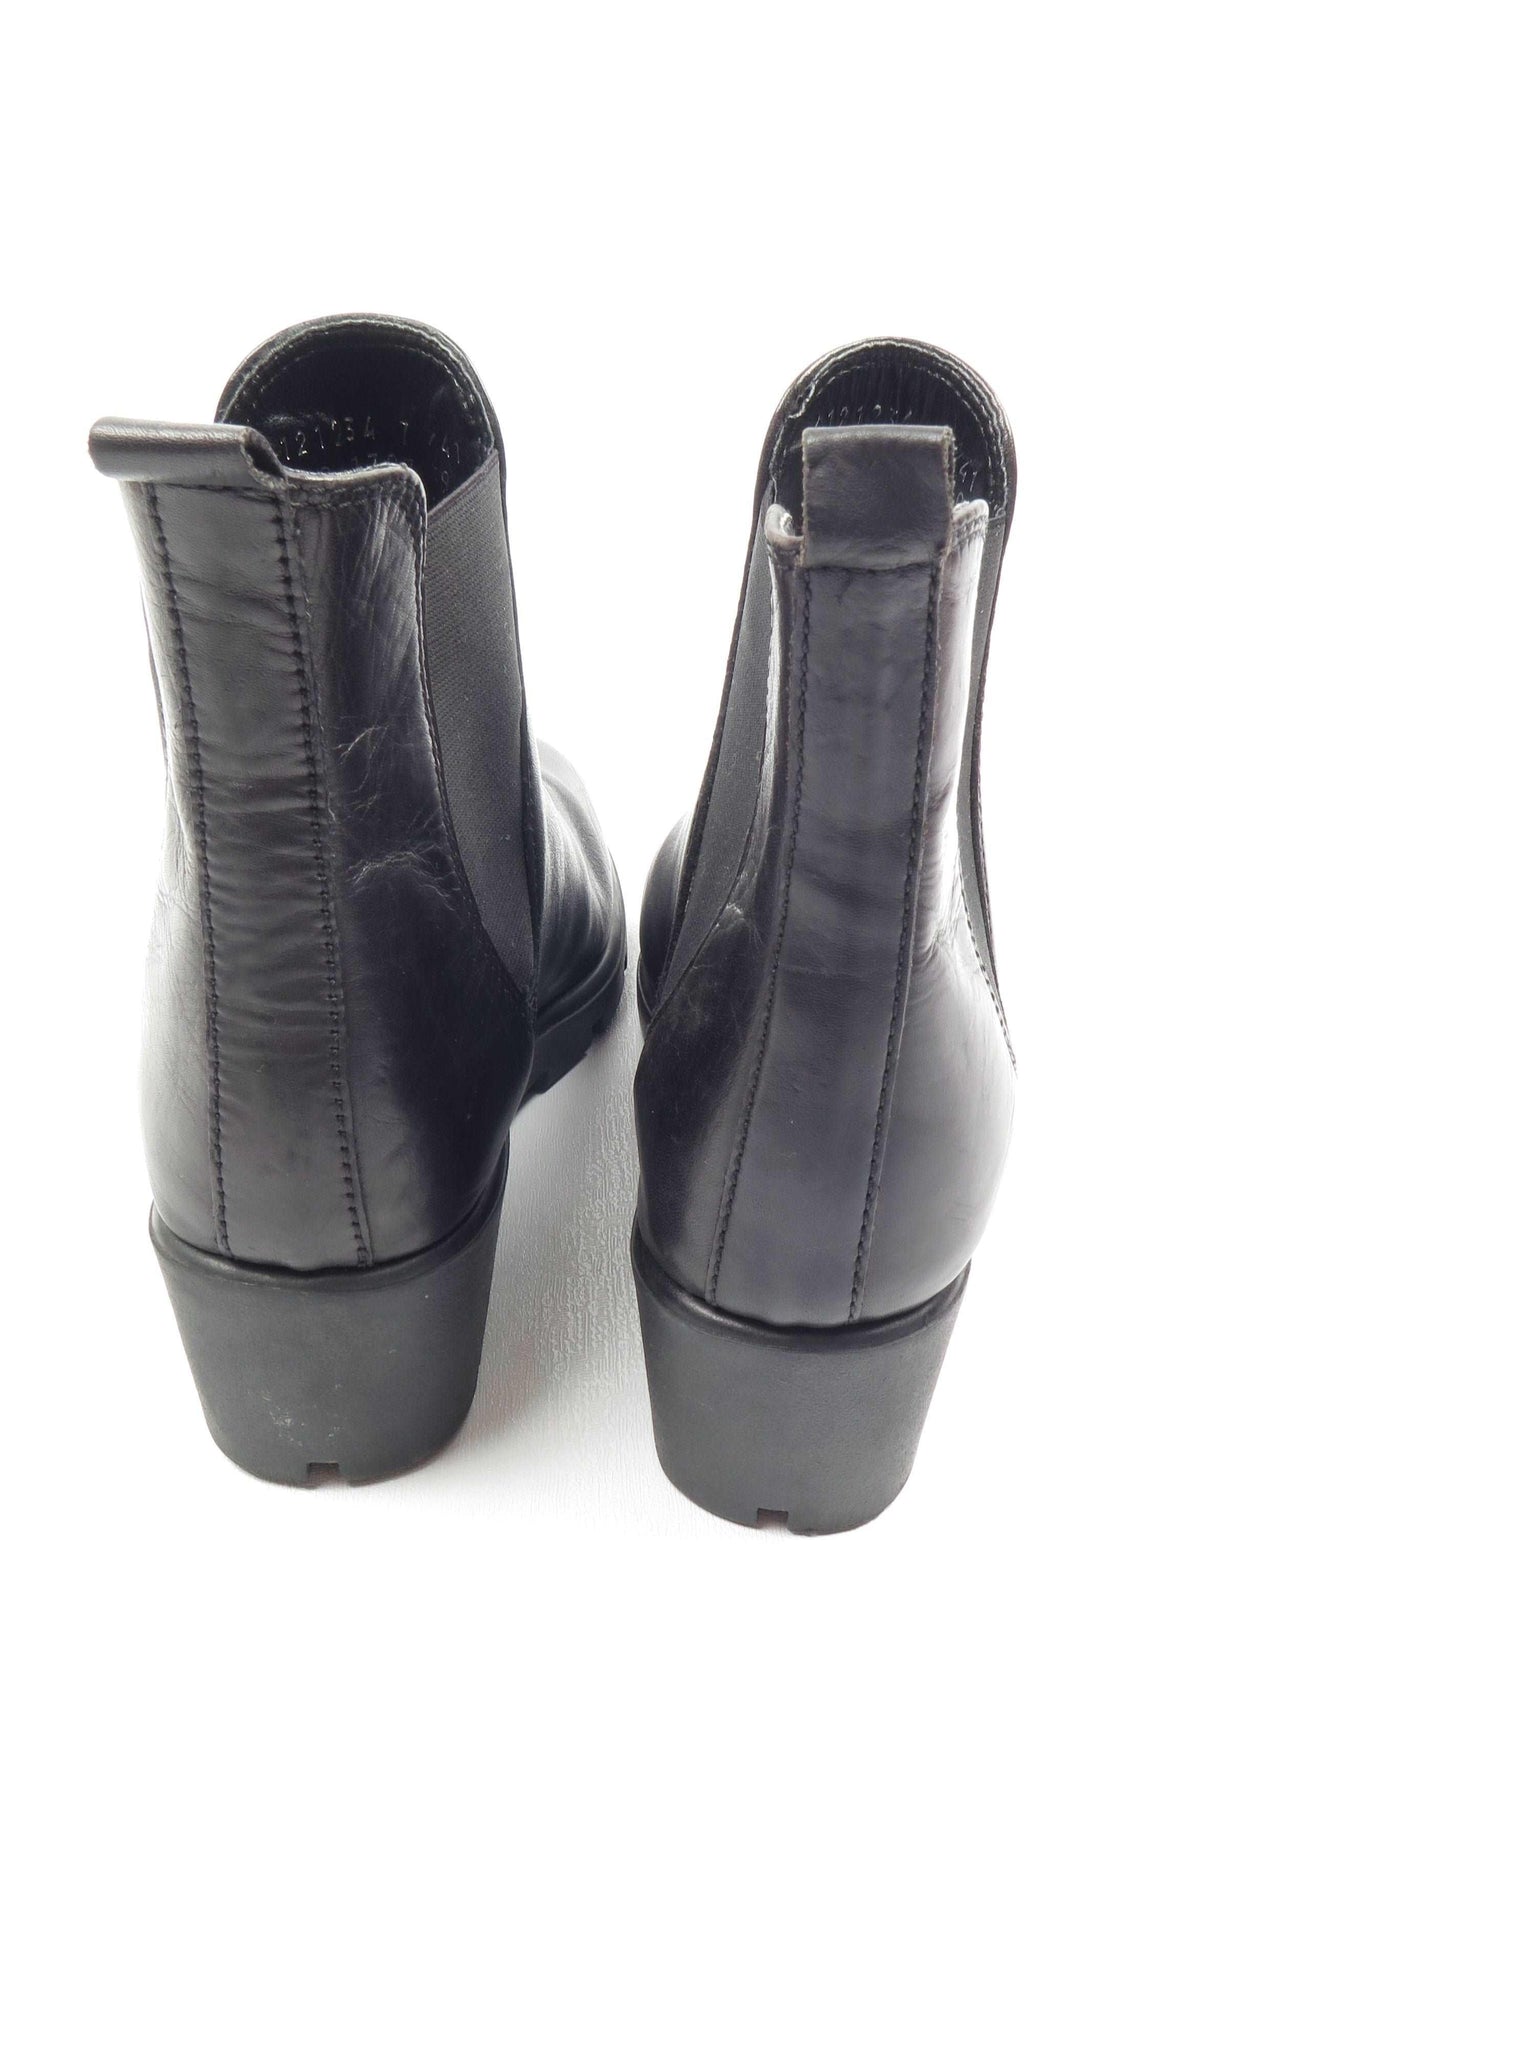 Black Leather Ankle Boots With Wedge Heels 41/8 - The Harlequin